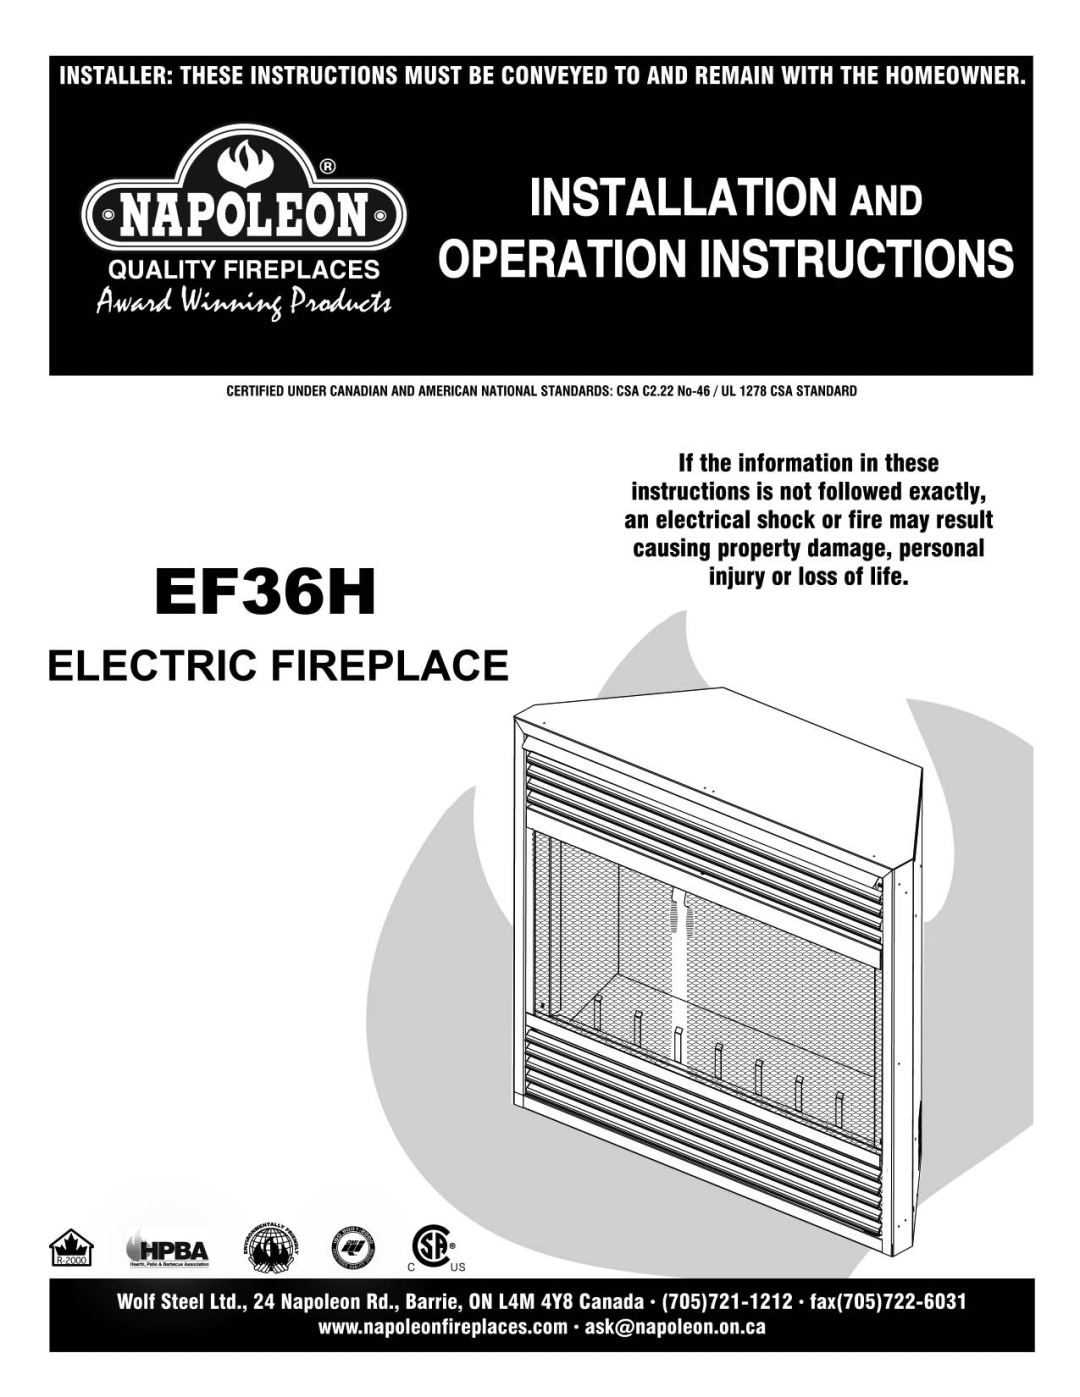 Napoleon Fireplaces EF36H, EF34H manual For Your Safety 